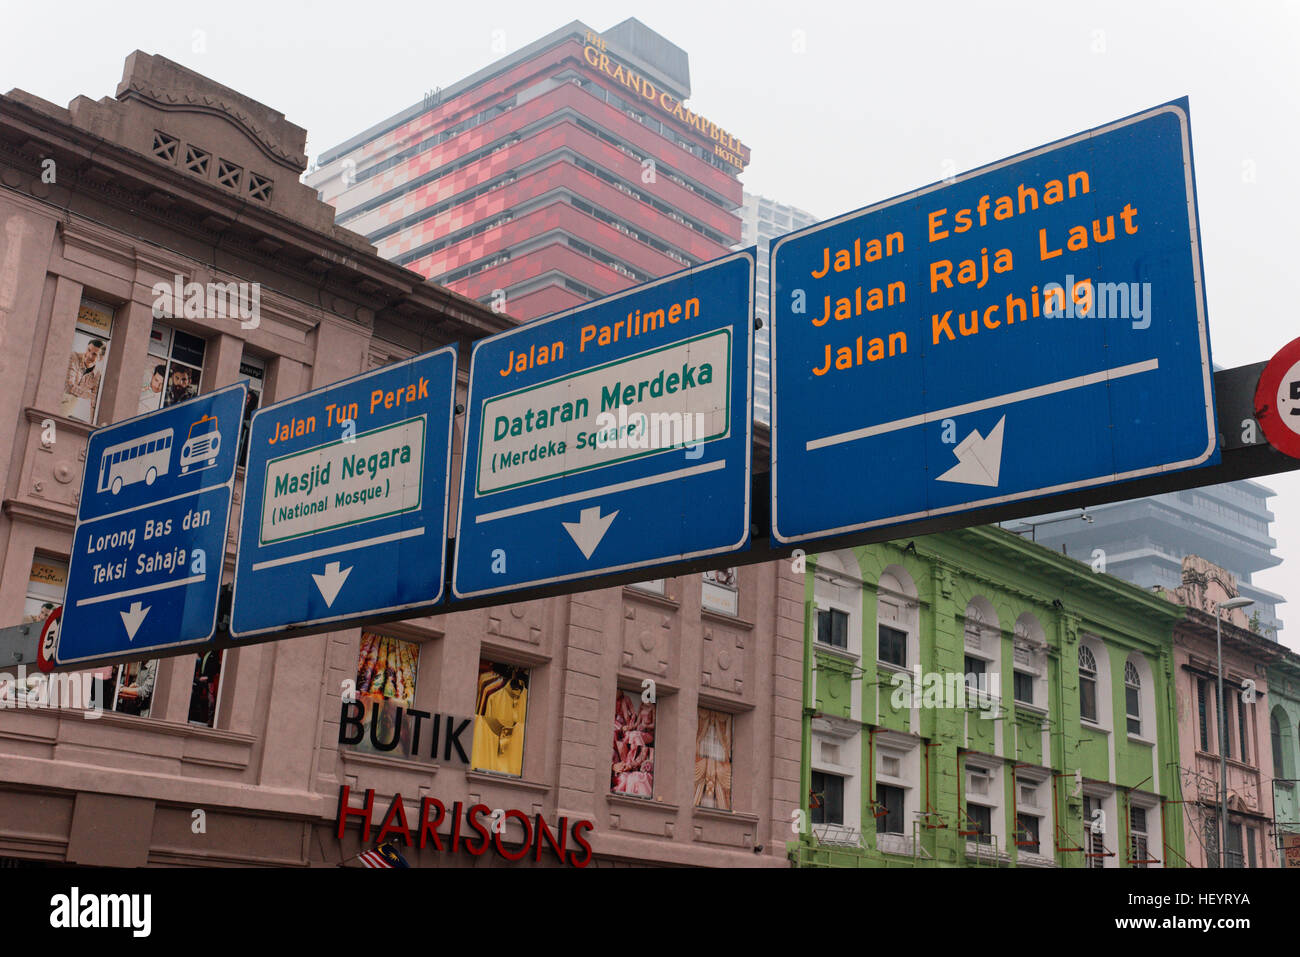 Road traffic signs in central Kuala Lumpur, Malaysia Stock Photo